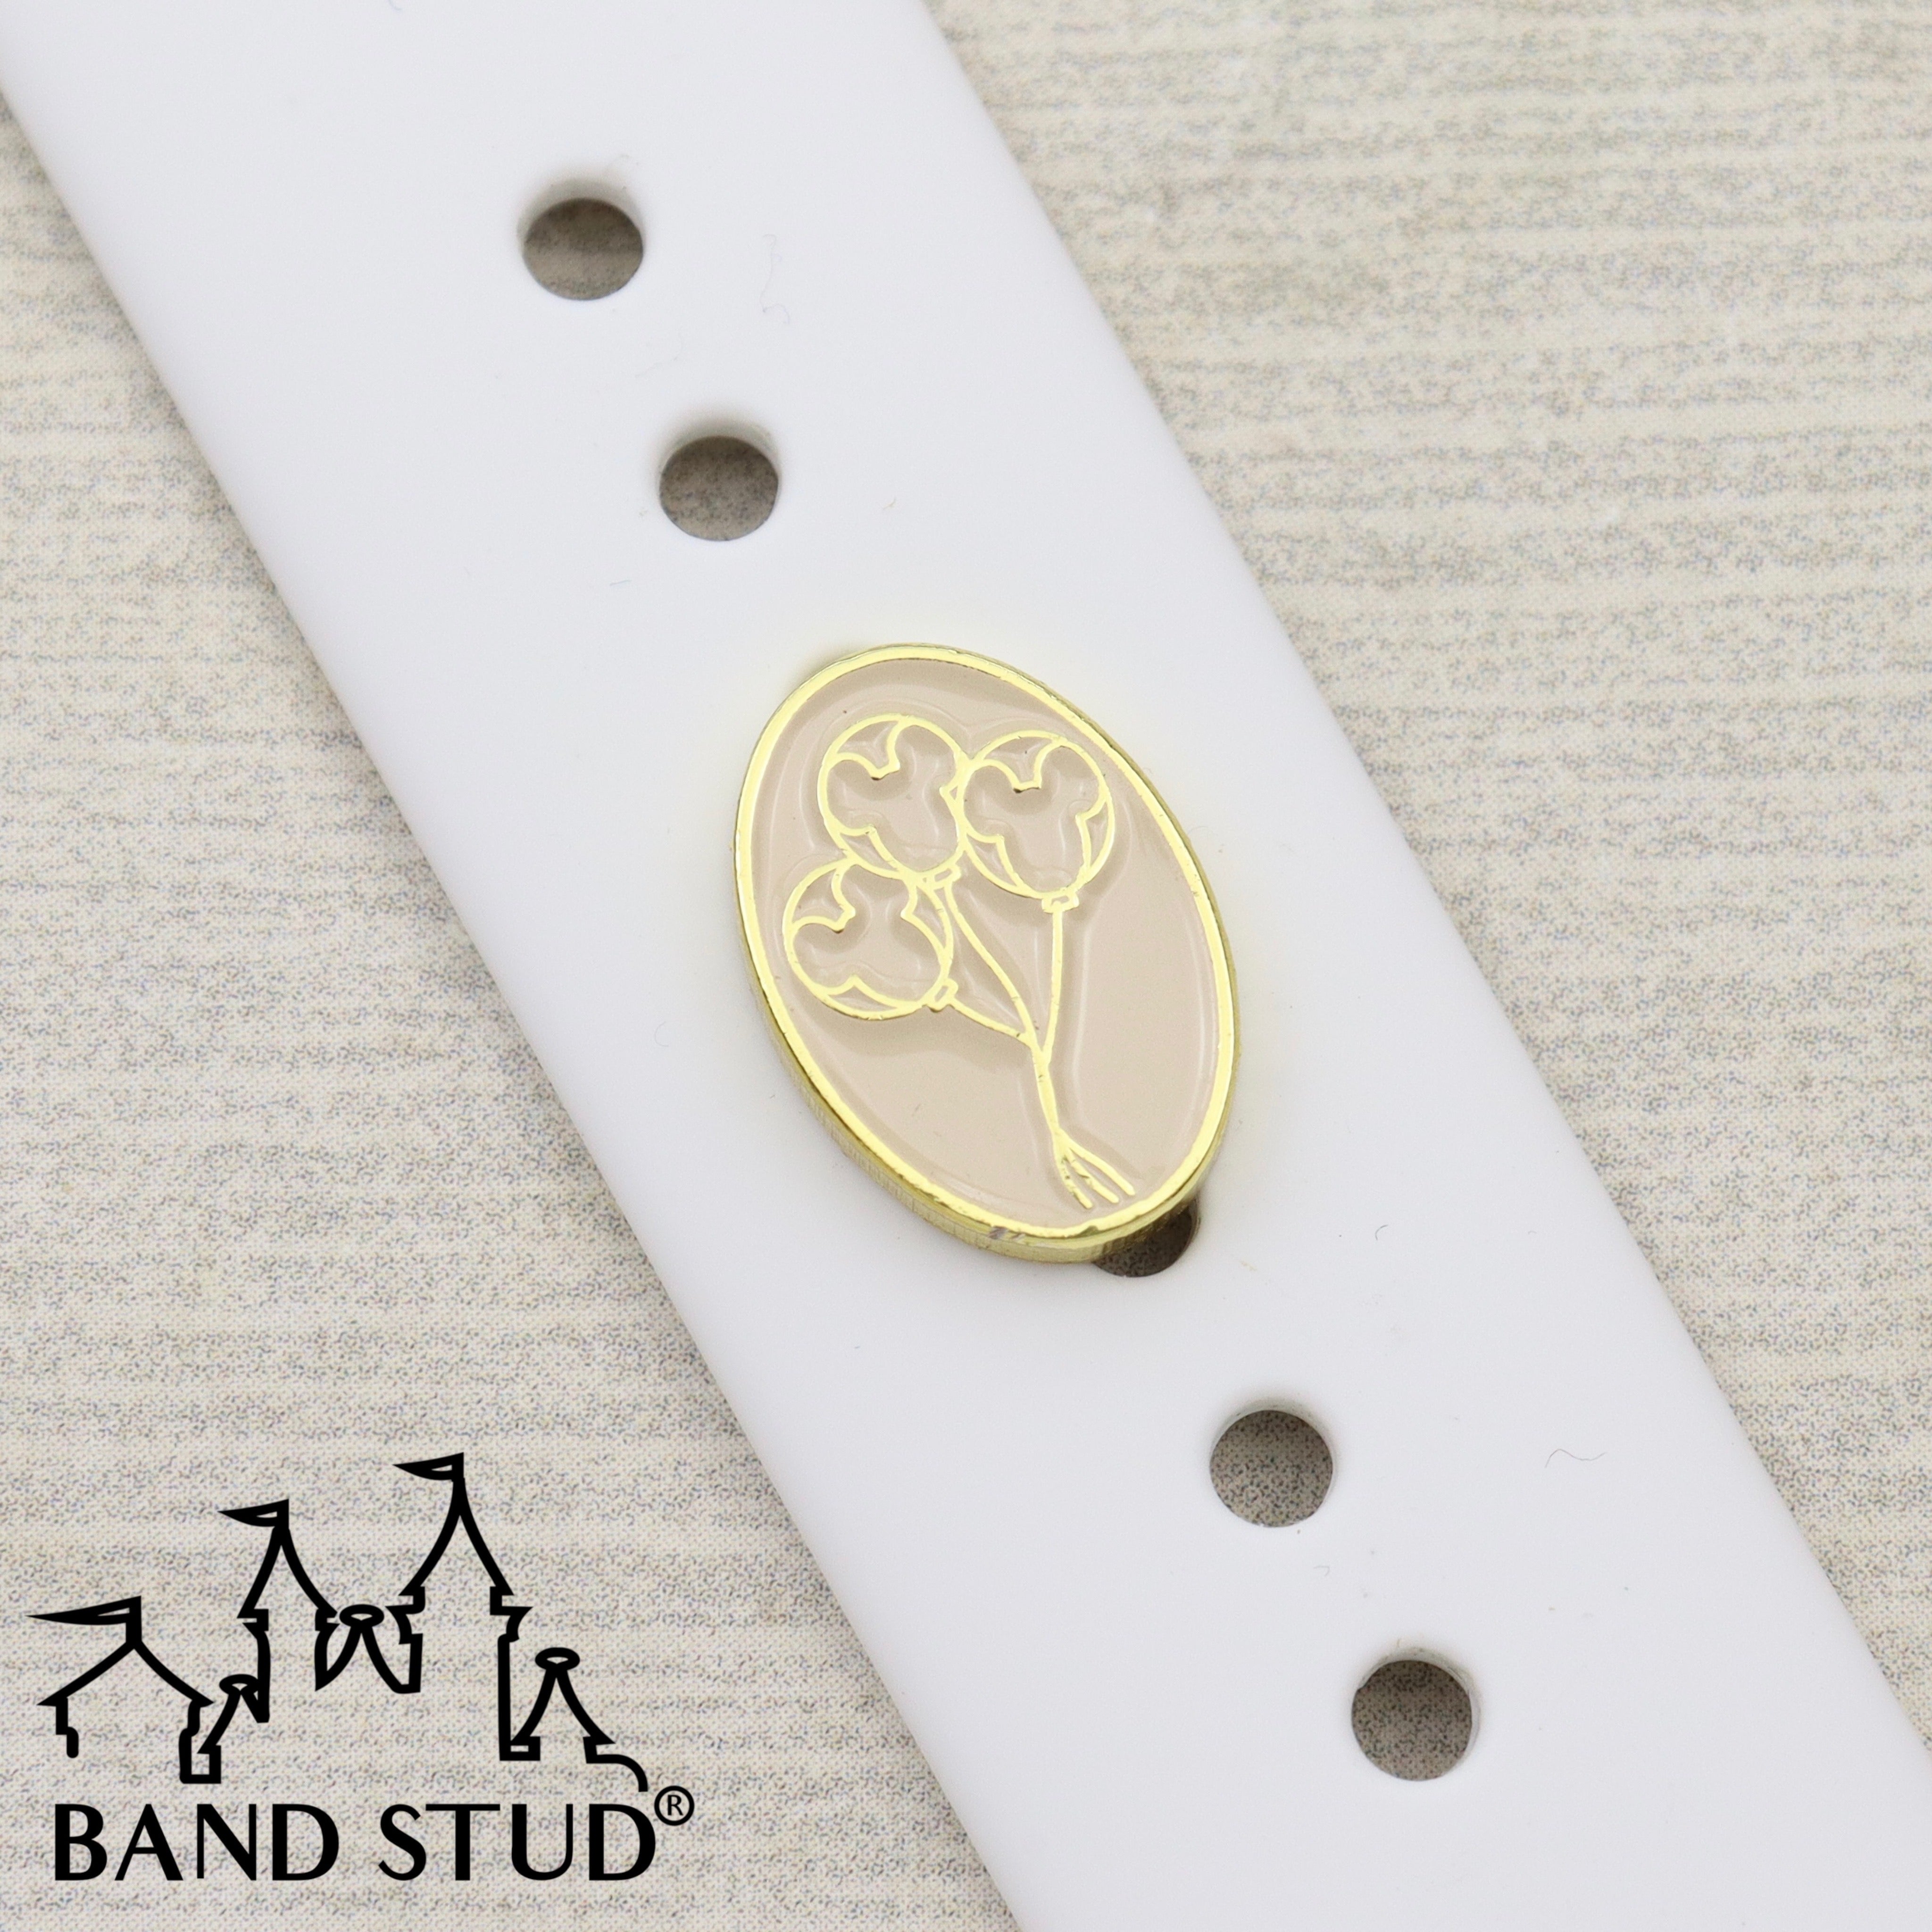 Band Stud® - The Neutrals - Balloons